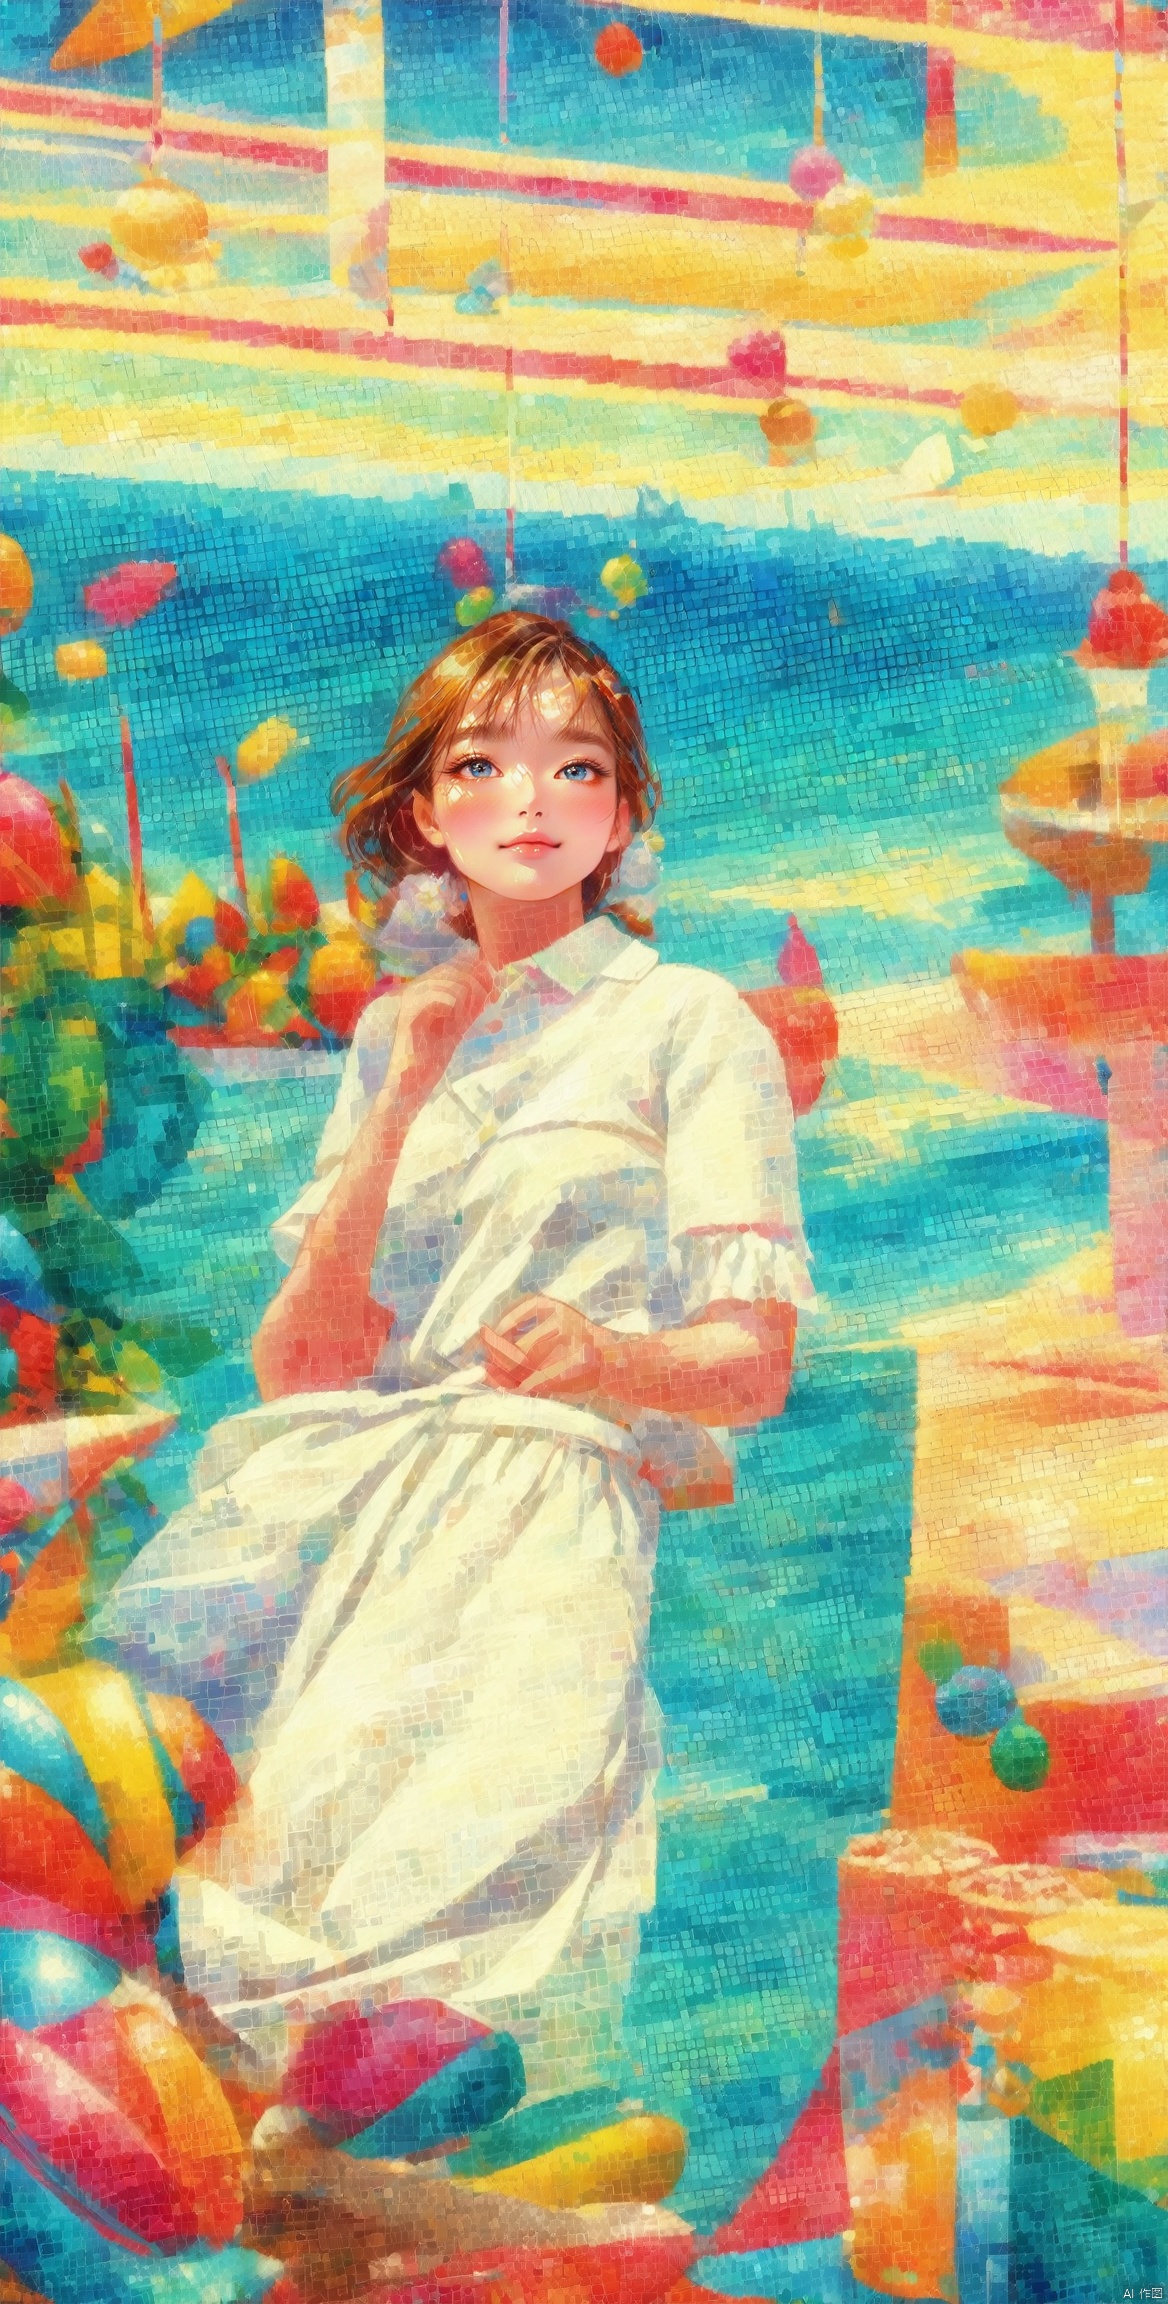  impressionism, girl, (summer clothes:1.2), tropical, sea, peaceful atmosphere, high-quality, brushstrokes, cubism, beach landscape, bird's-eye view, dynamic postures, rich color palette surrealism, young woman, dreamy seaside scene outside, tilted angle, intricate details, vibrant colors, 
pointillism, hourglass_figure, festive decorations, frontal view, vivid colors, textured patterns, pop art, female traveler, summer wonderland, diagonal perspective, bold lines, high-contrast colors, candy-coated